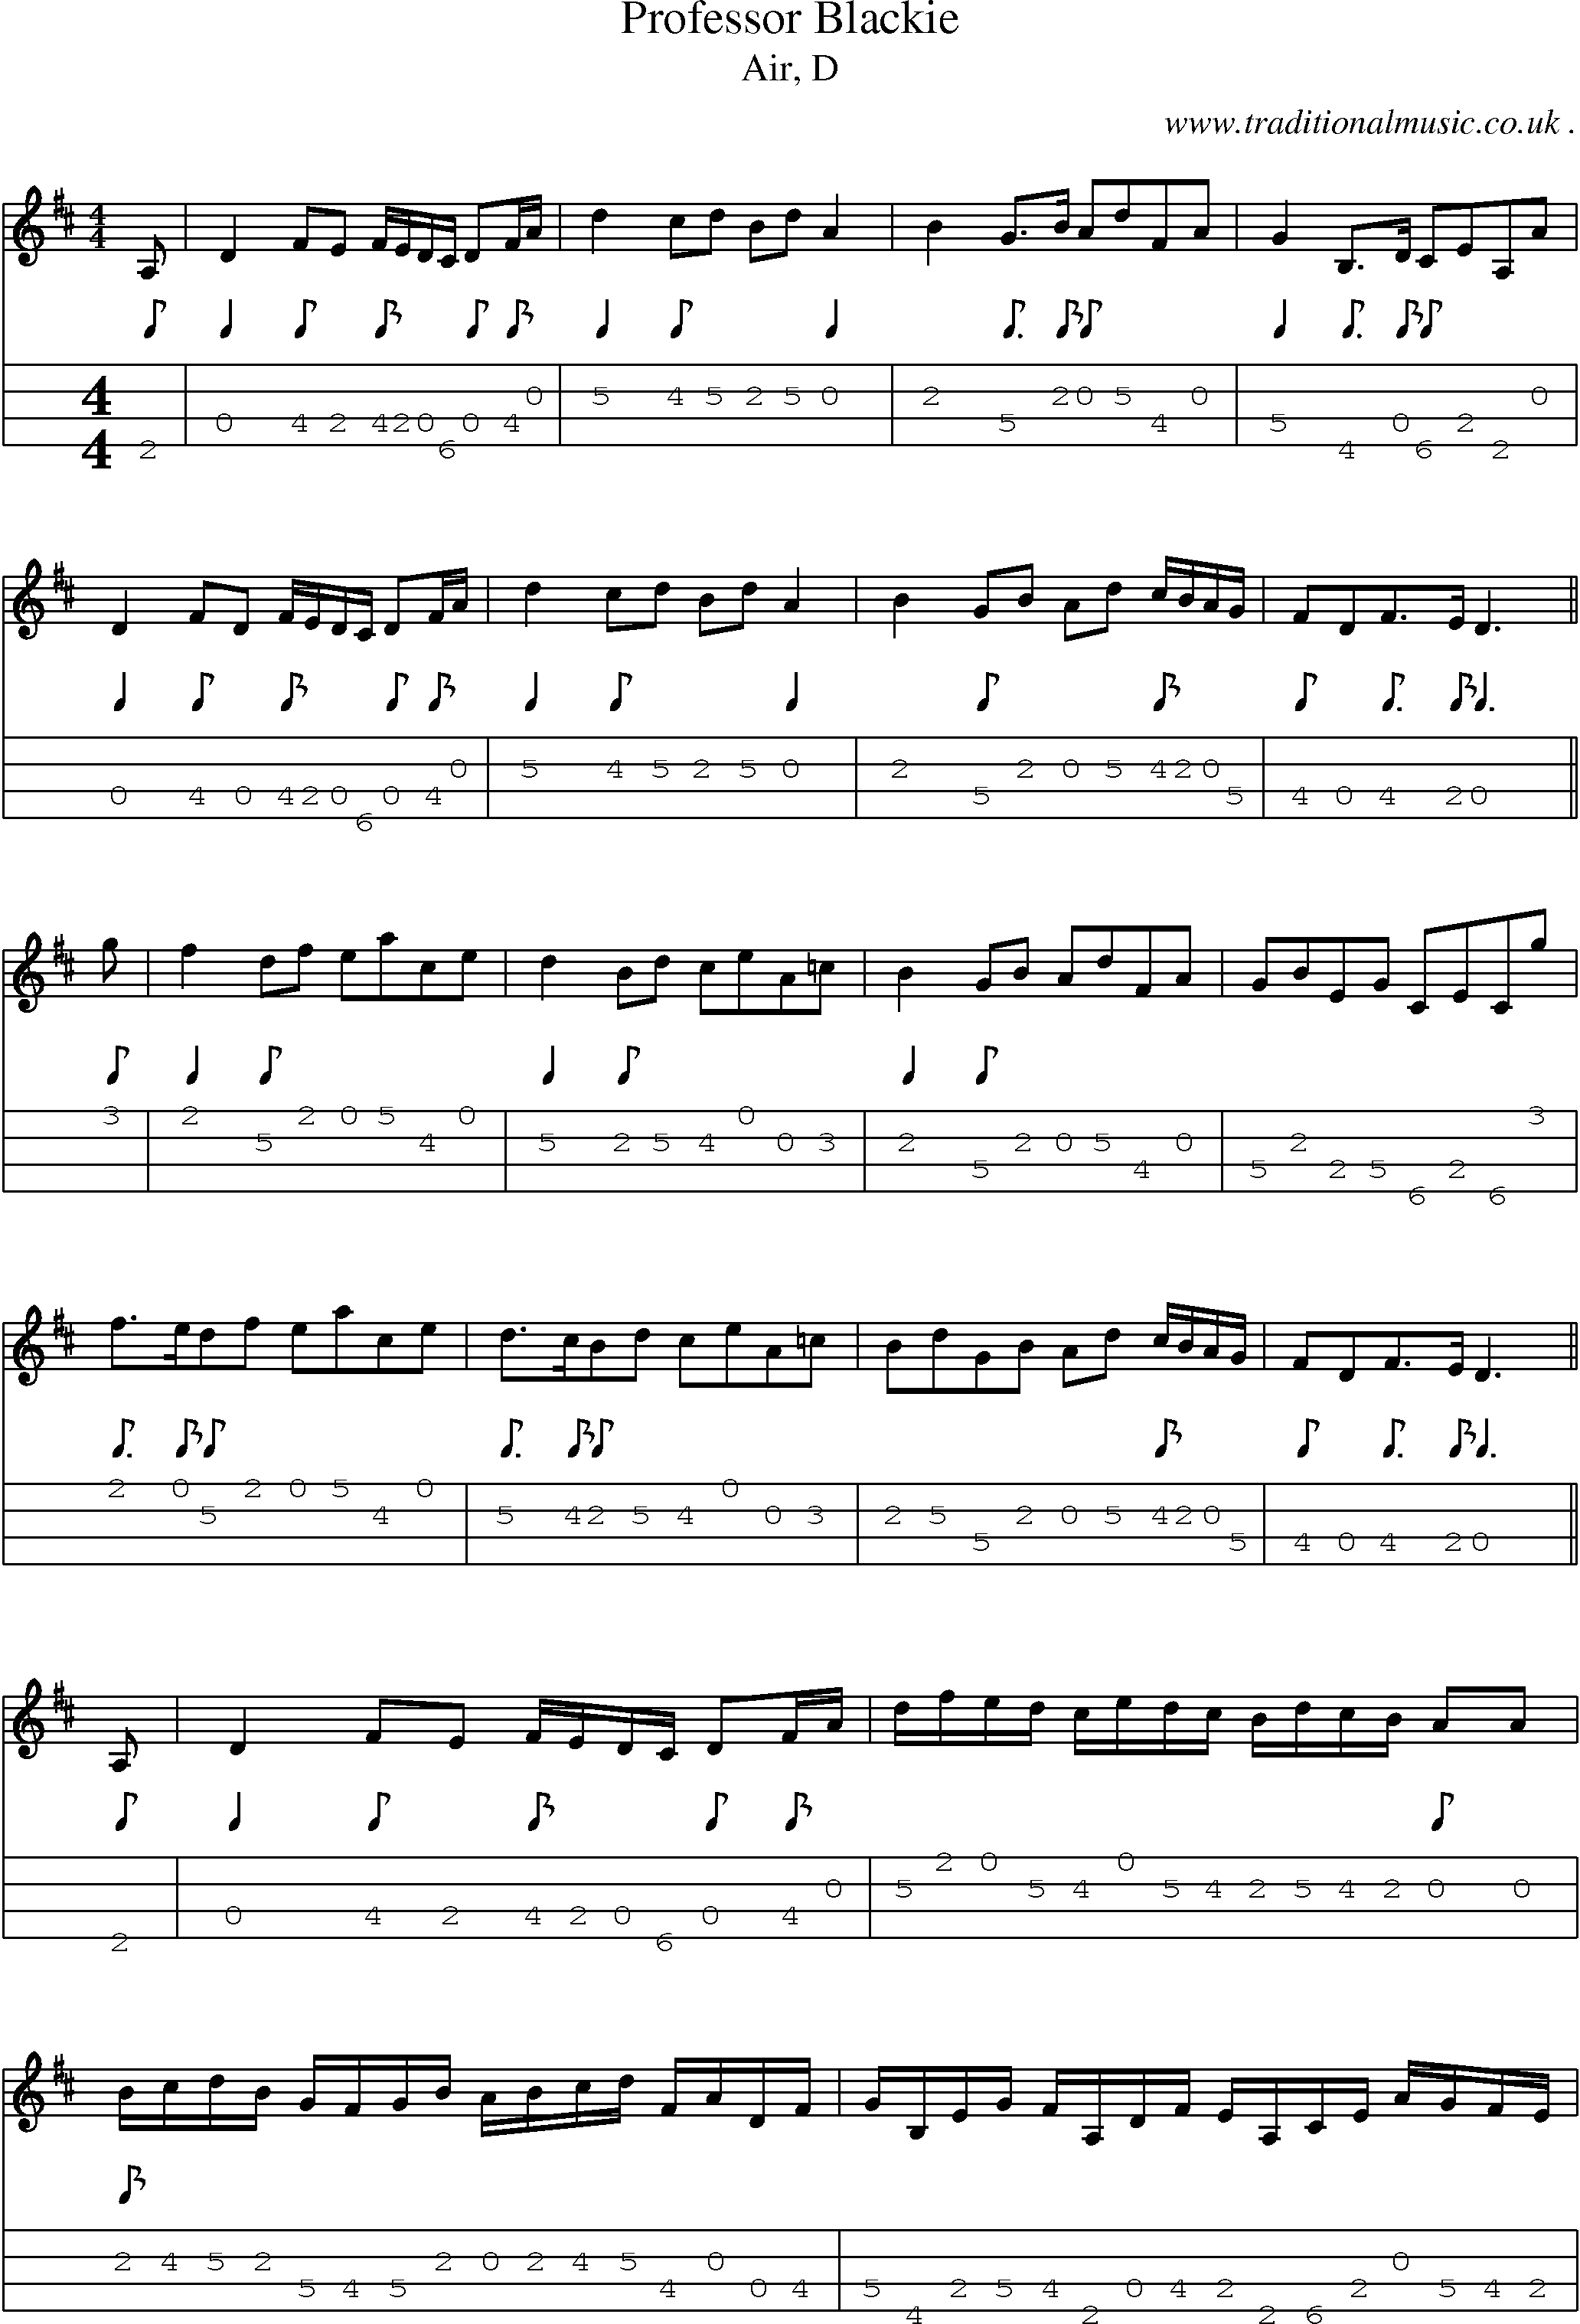 Sheet-music  score, Chords and Mandolin Tabs for Professor Blackie